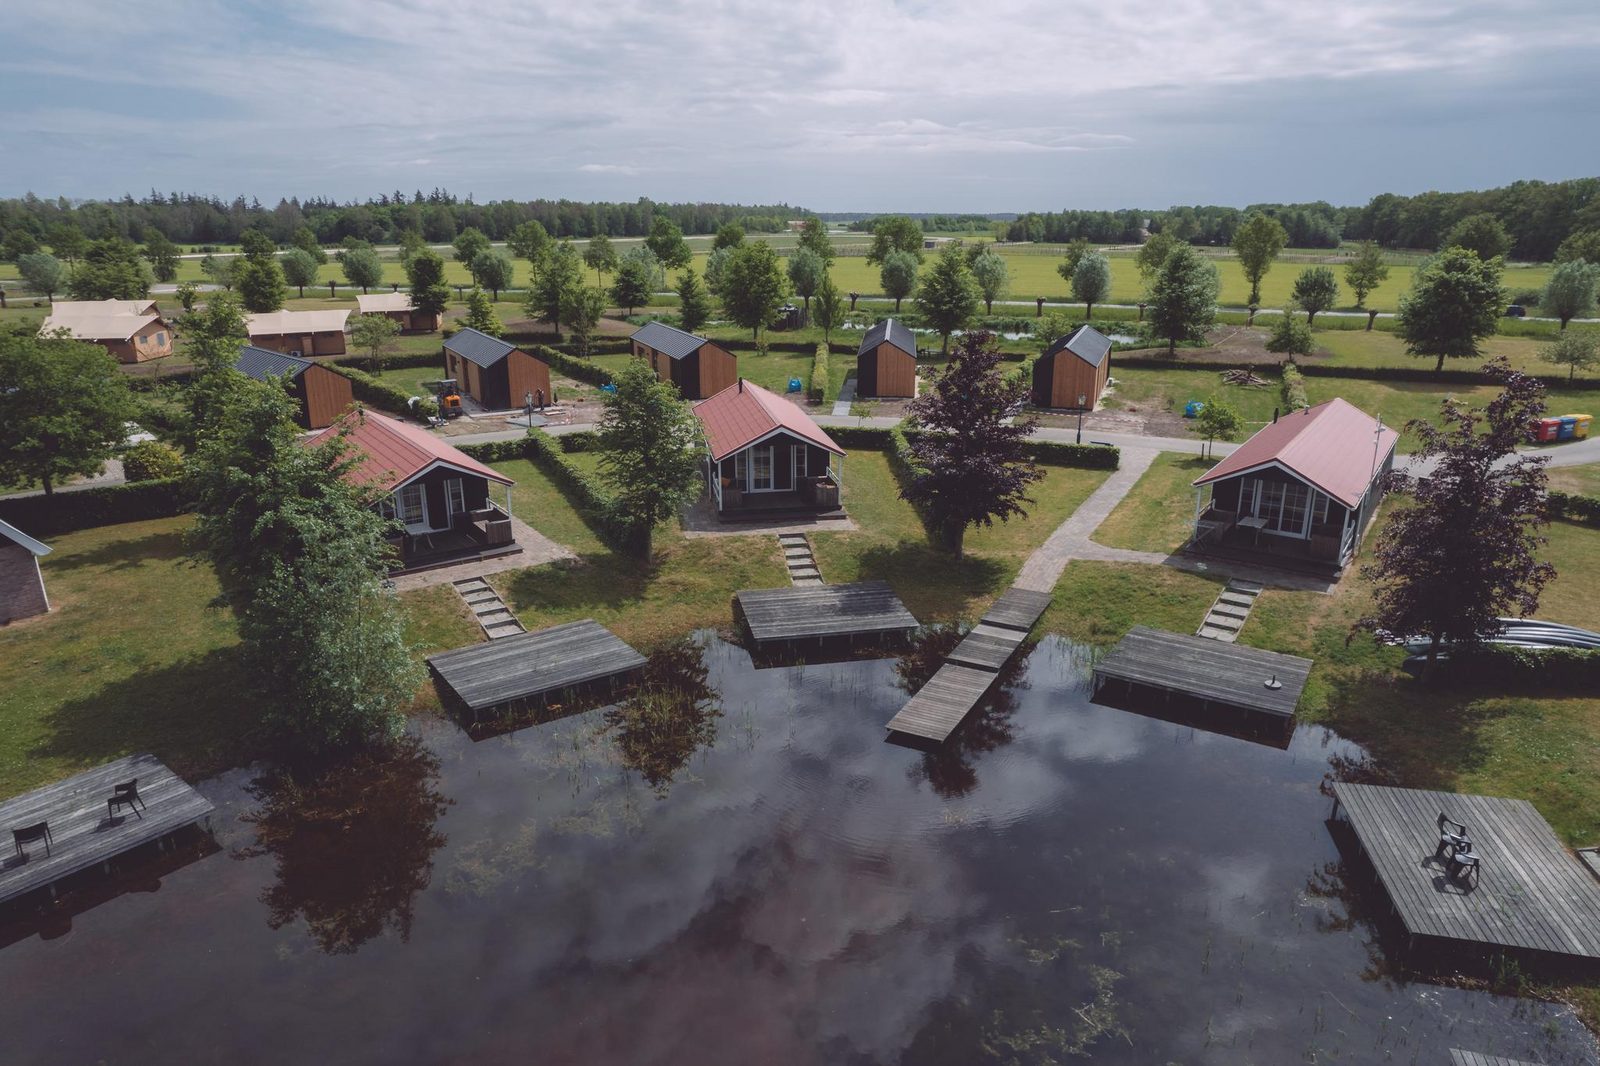 Group accommodation: combination of all holiday park accommodation options (230 people)